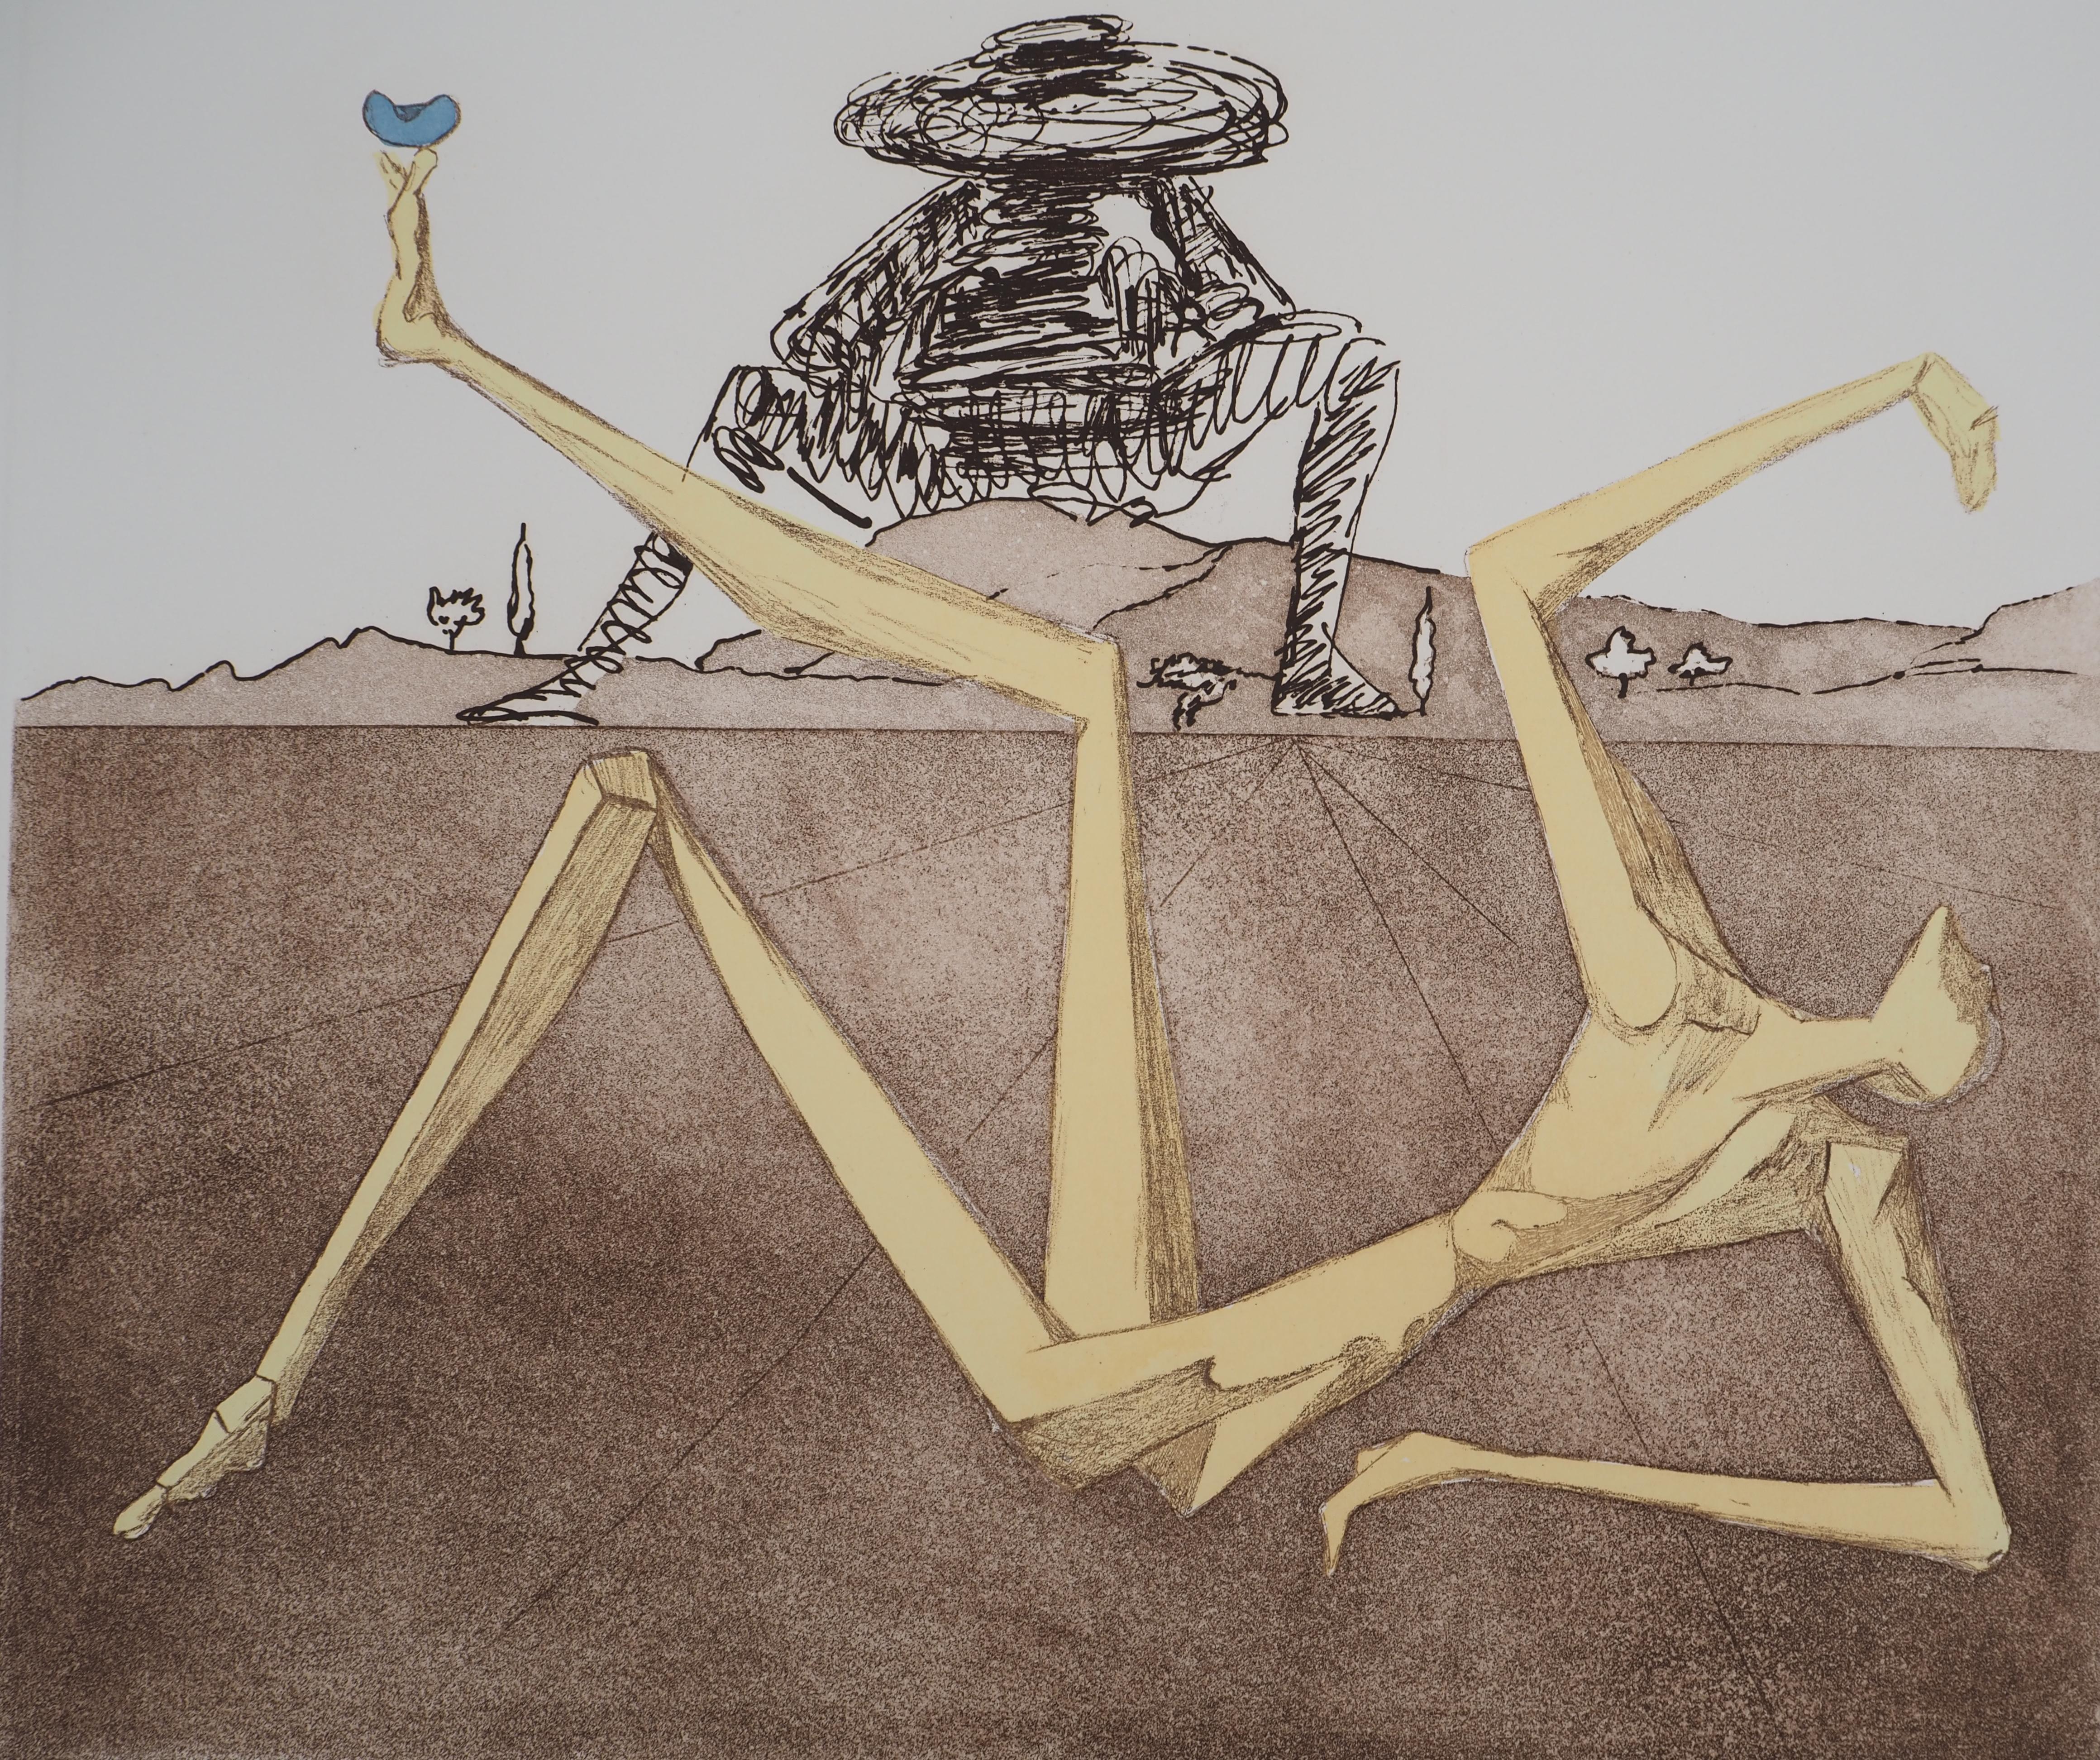 Don Quijote : The Heart of Madness - Original etching, Handsigned (Field #80-1J) - Surrealist Print by Salvador Dalí